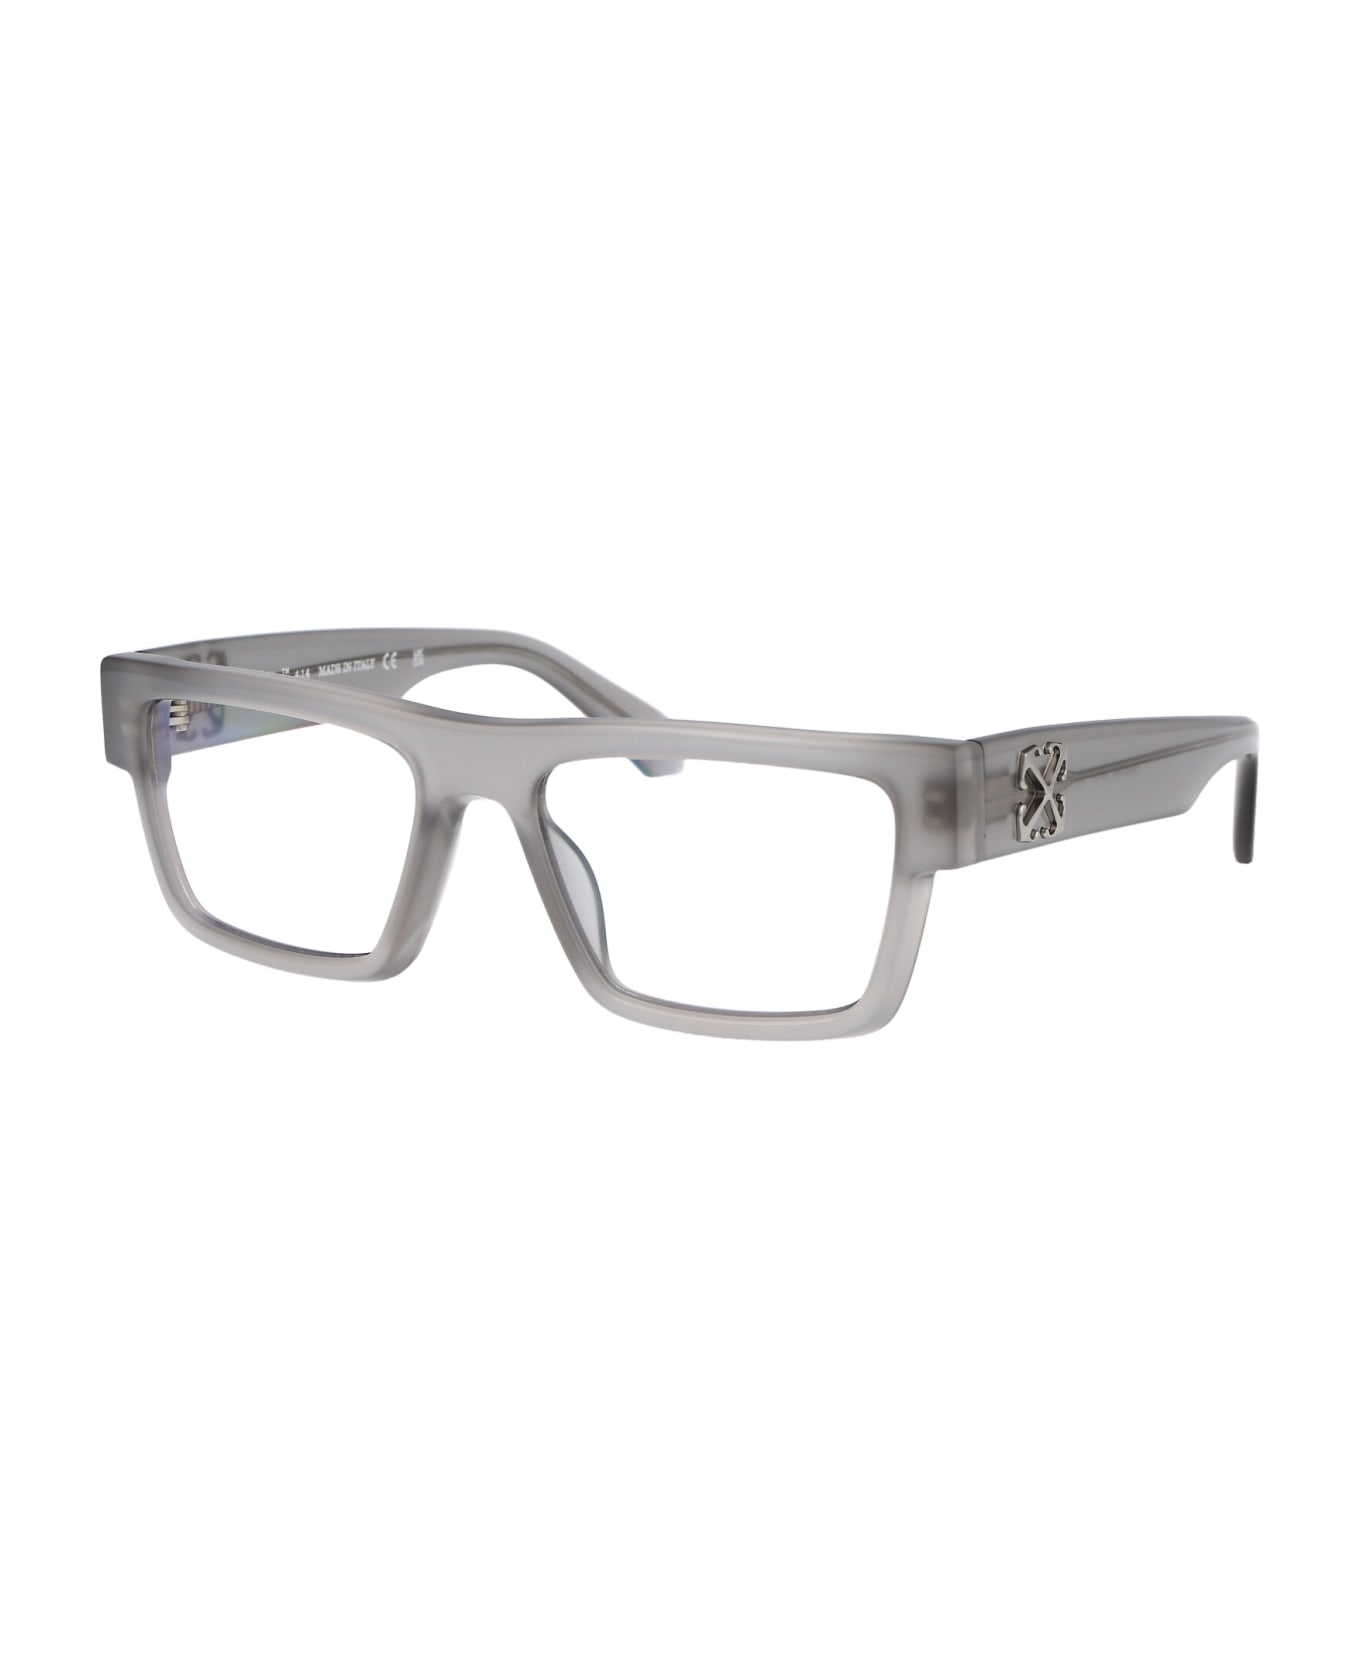 Off-White Optical Style 61 Glasses - 0900 GREY 